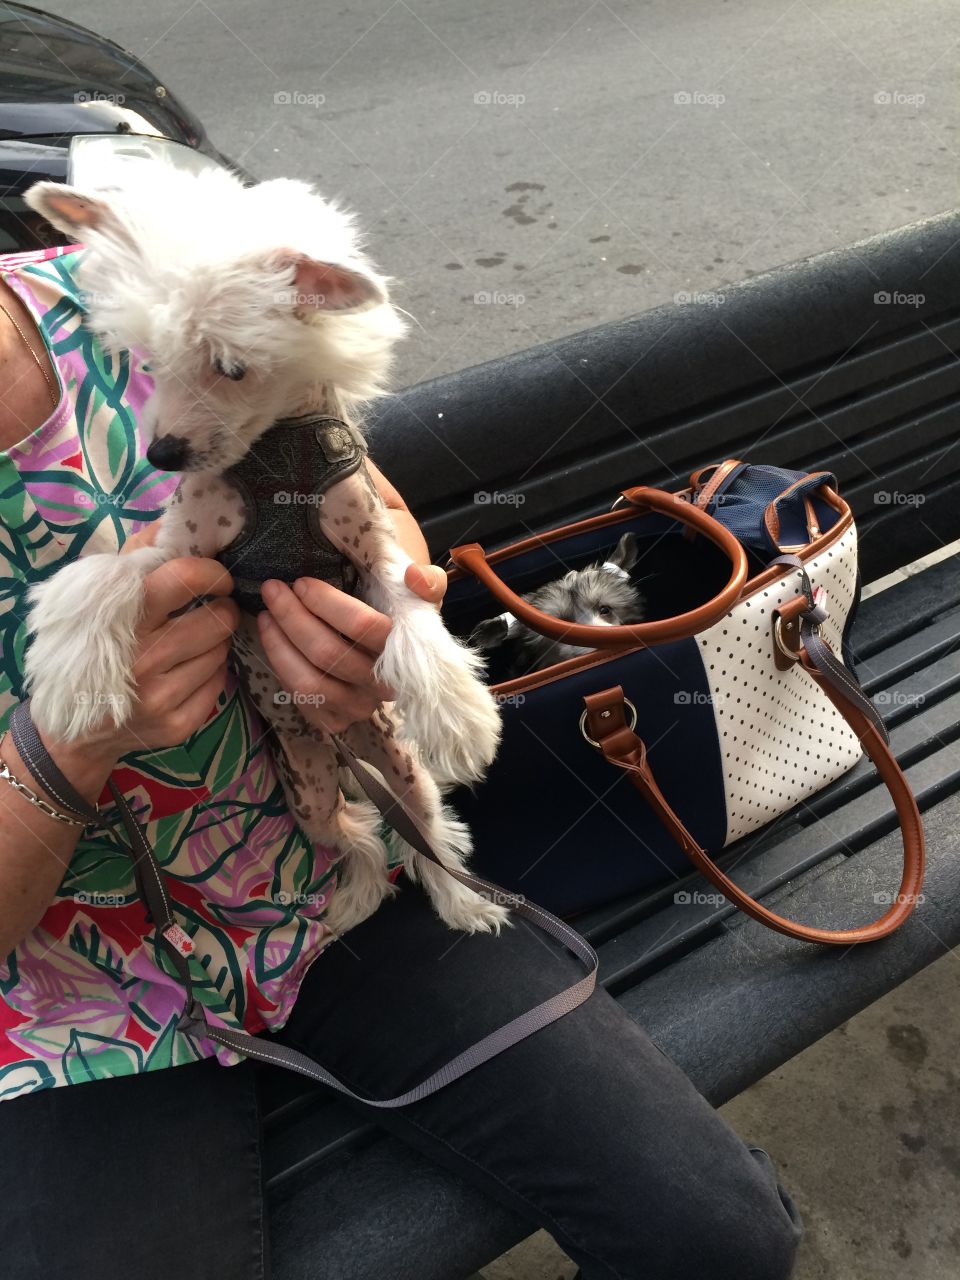 Look in the purse for a surprise! 